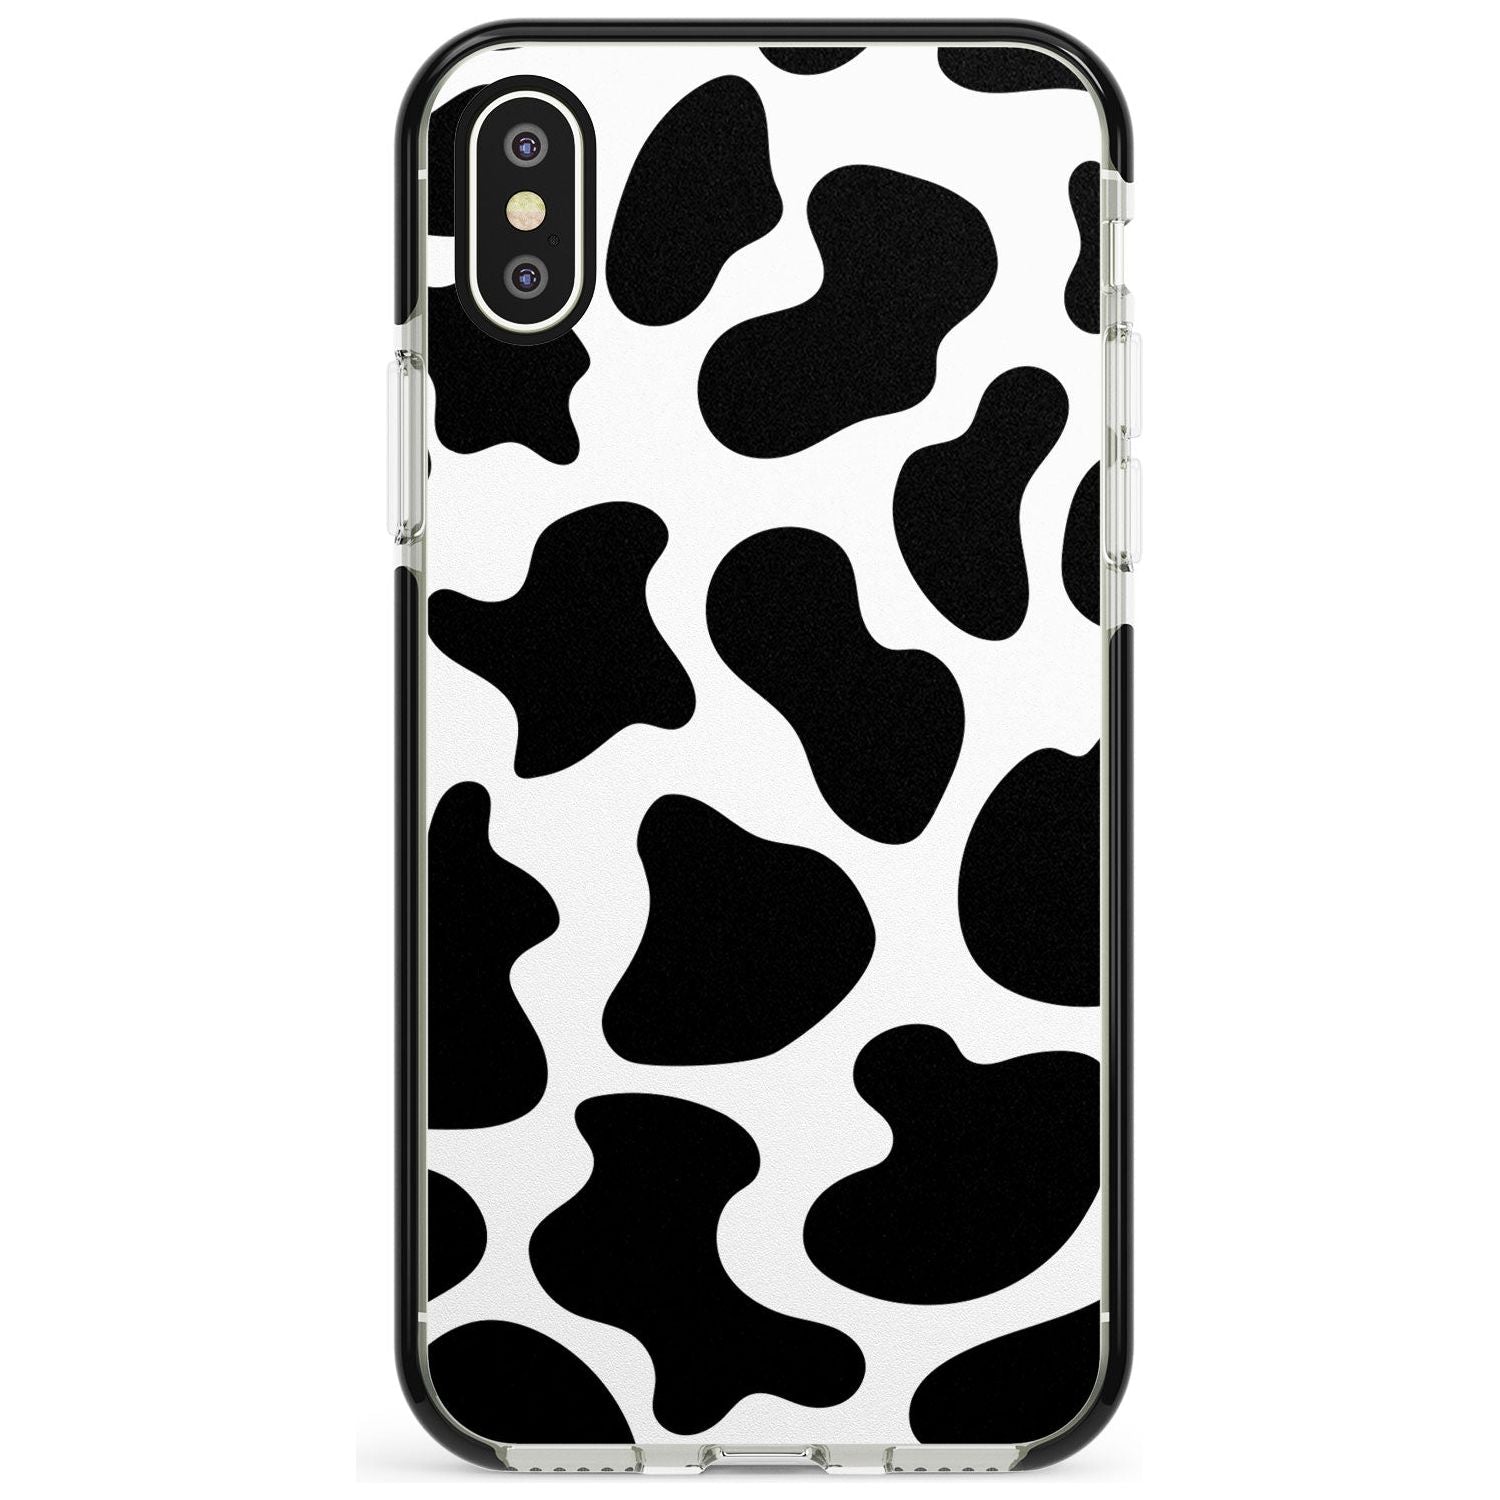 Cow Print Pink Fade Impact Phone Case for iPhone X XS Max XR